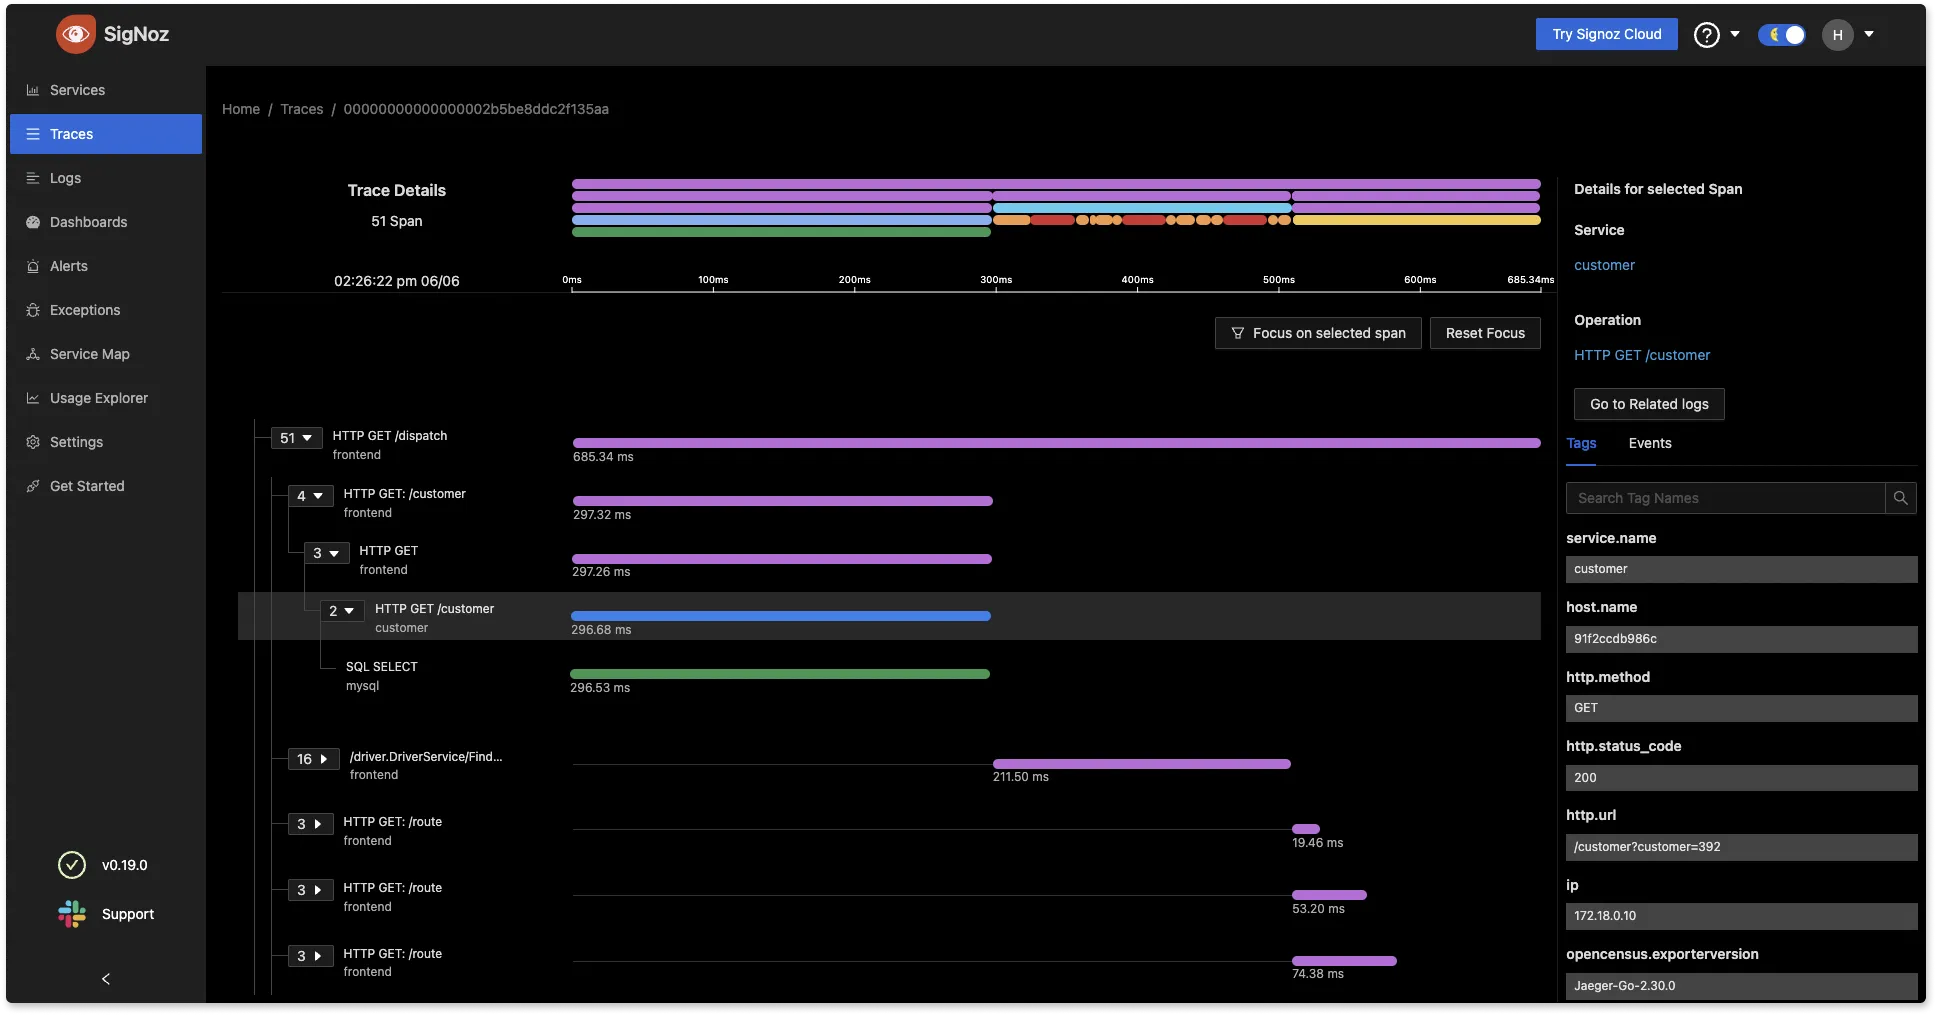 Distributed tracing visualized with flamegraphs on SigNoz dashboard